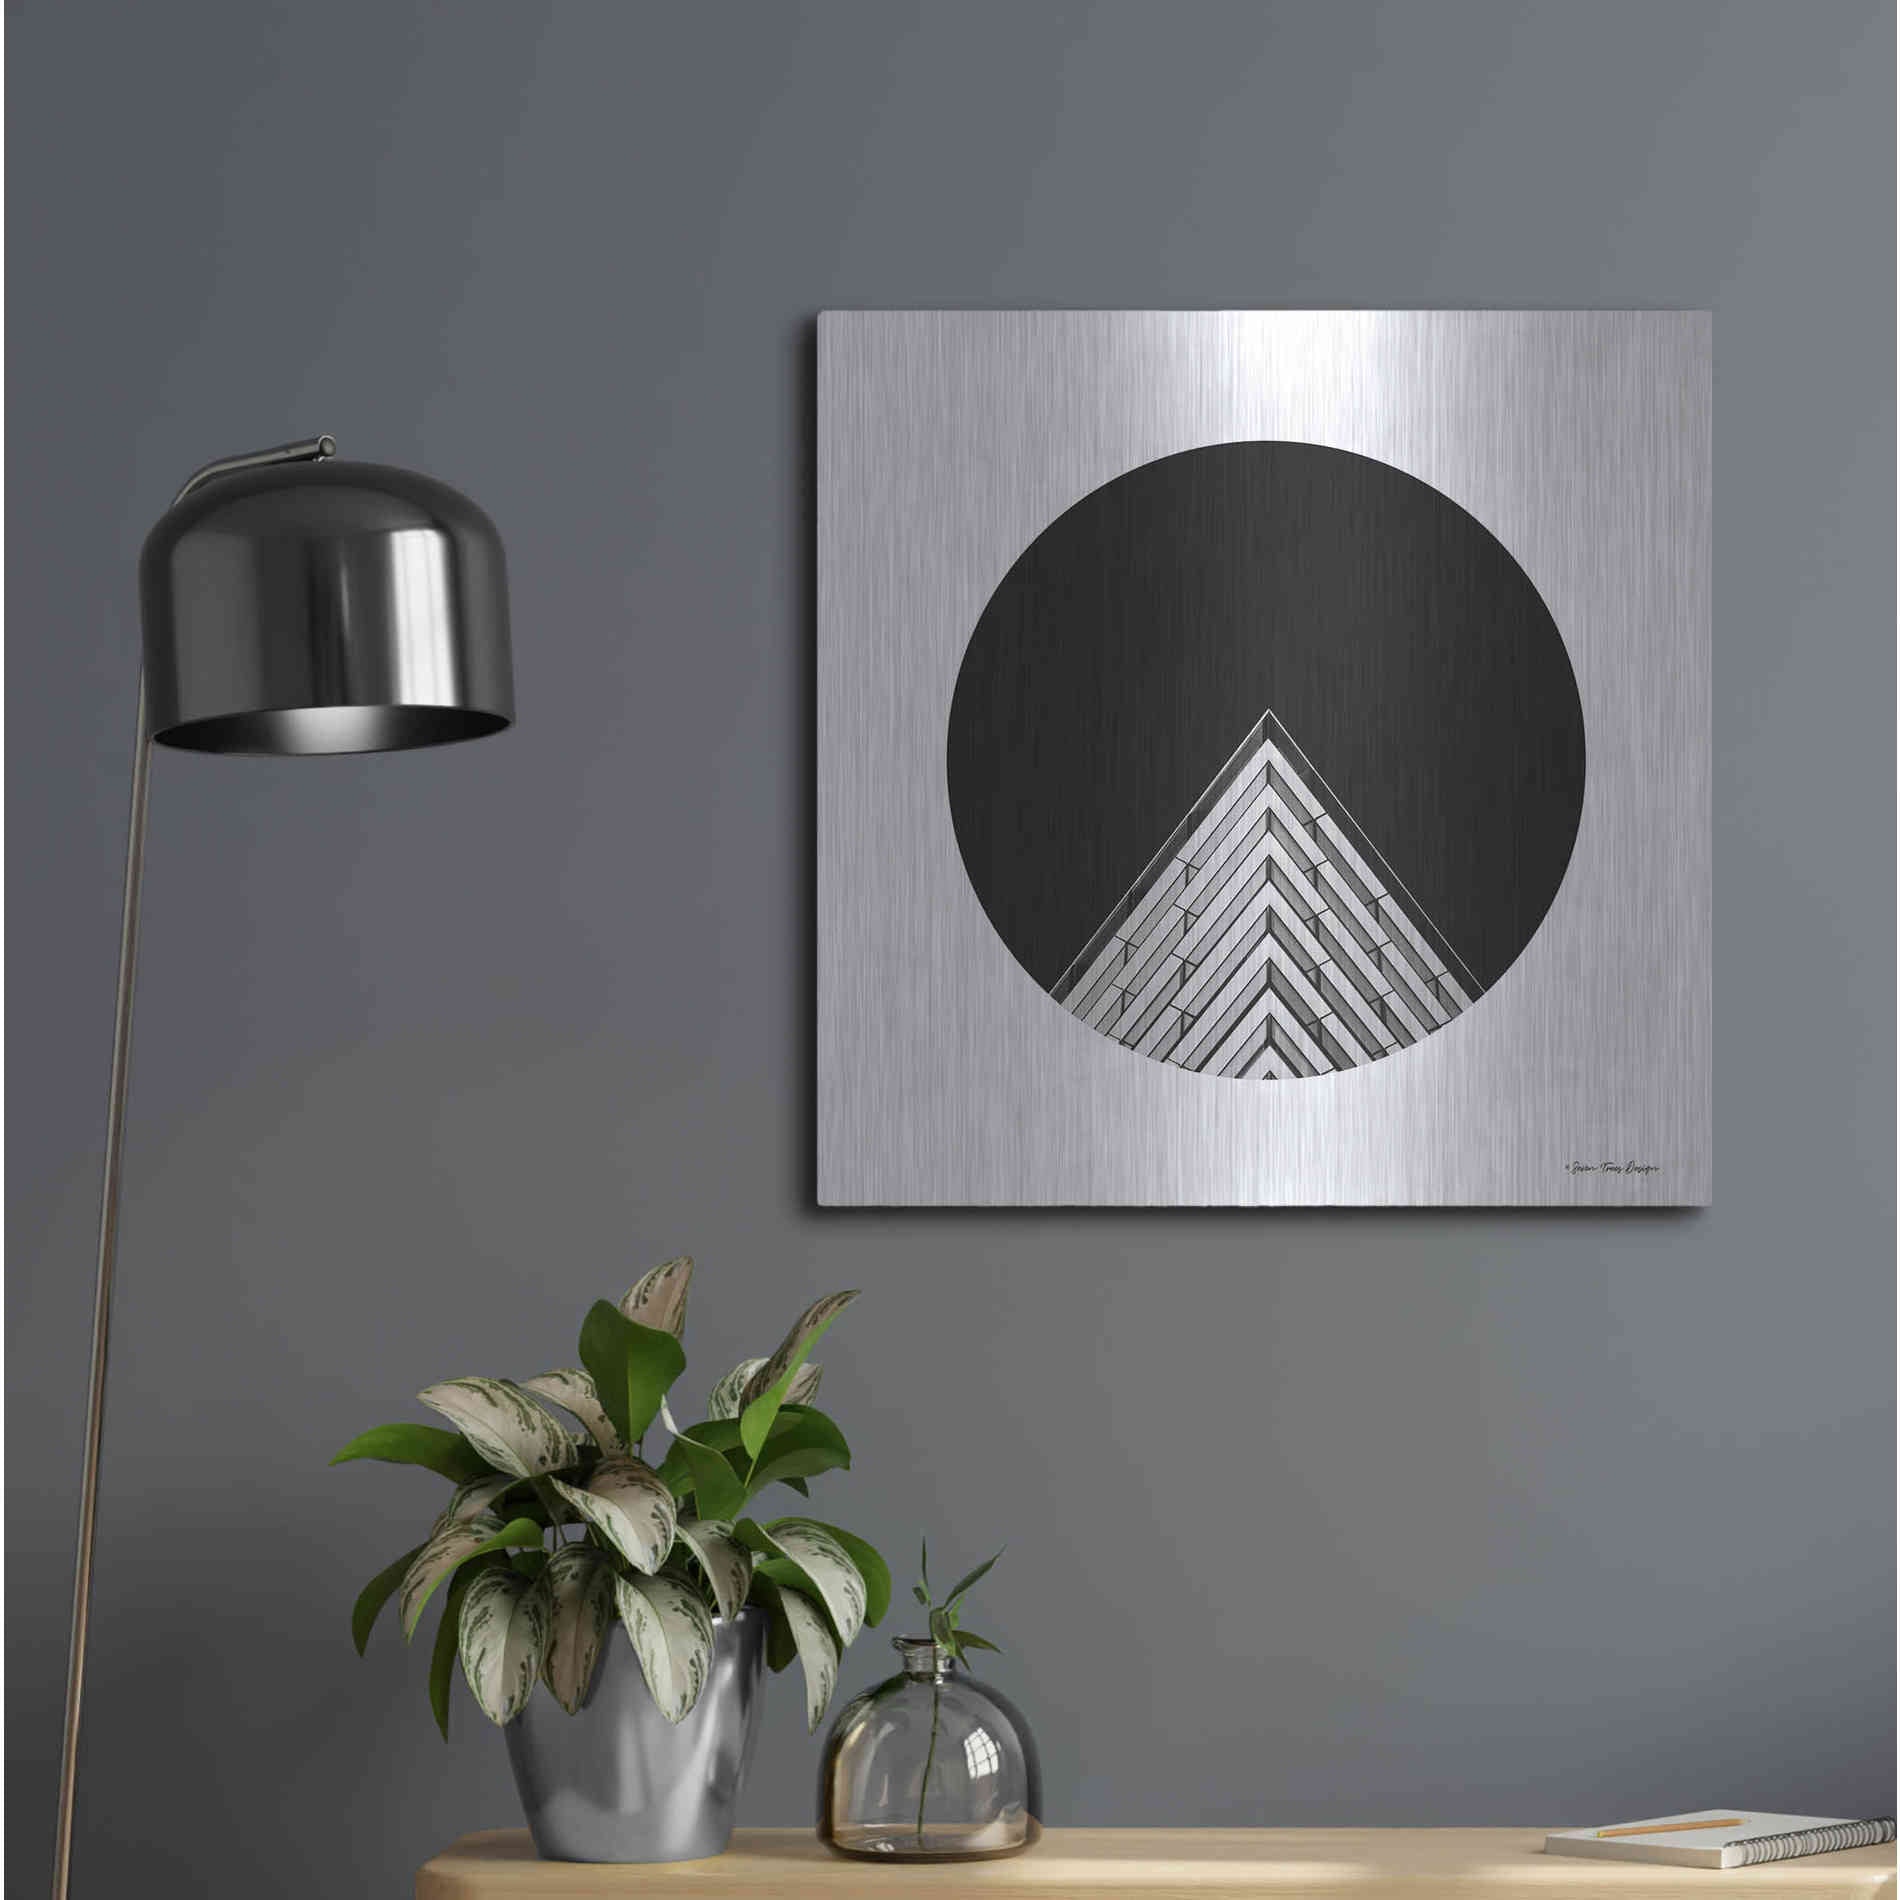 Luxe Metal Art 'Triangular Architecture' by Seven Trees Design, Metal Wall Art,24x24